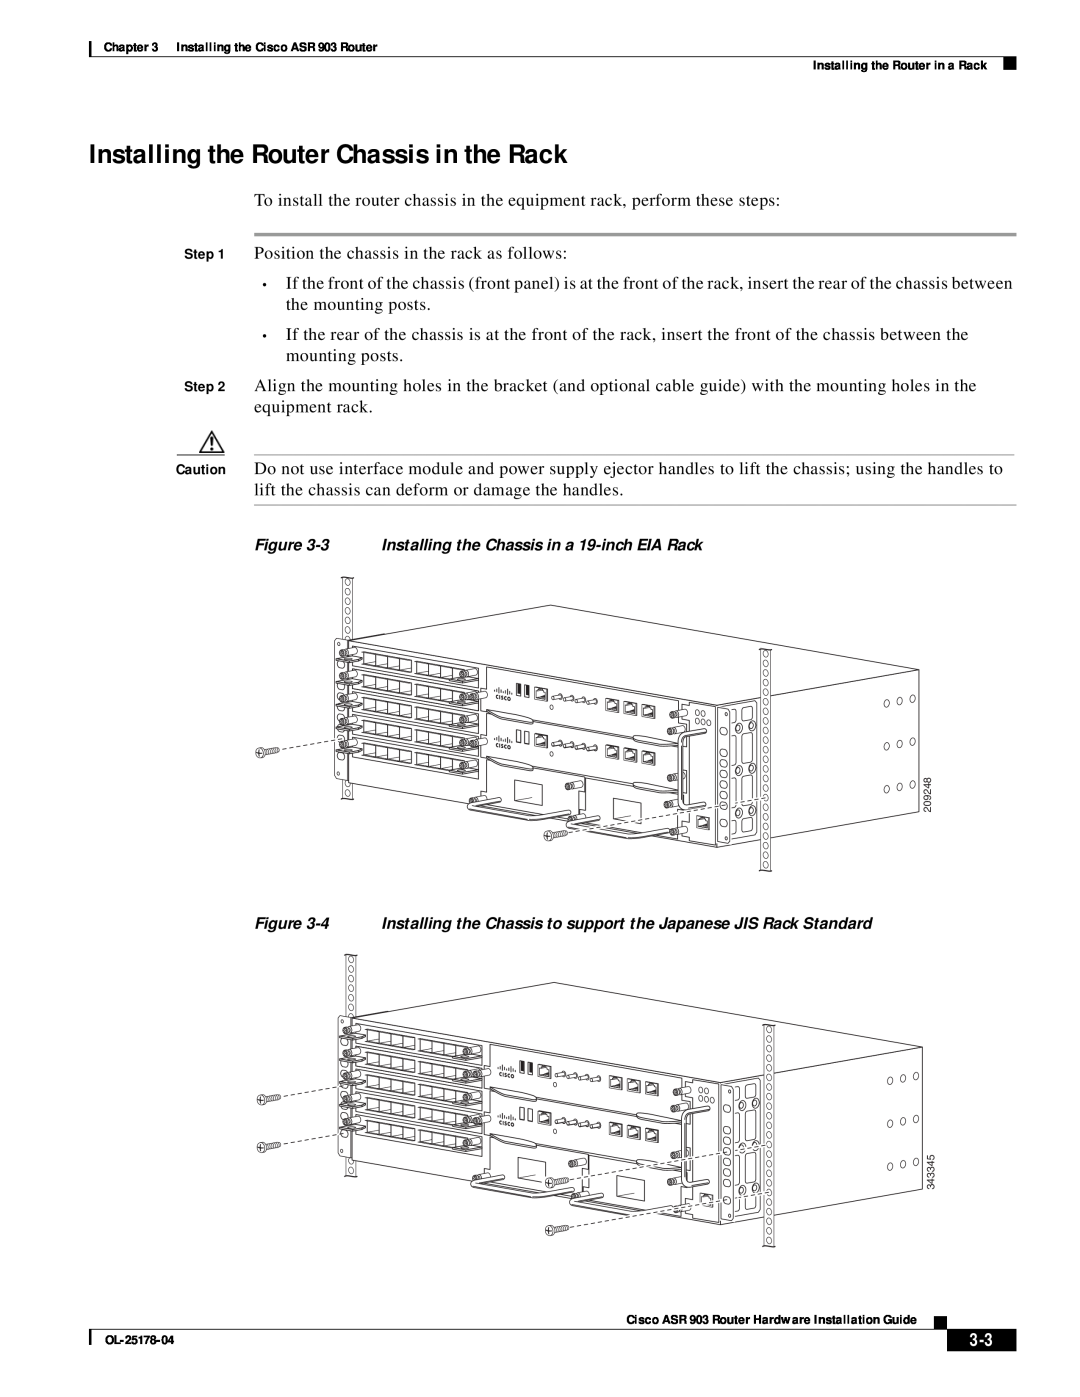 Cisco Systems ASR 903 manual Installing the Router Chassis in the Rack 